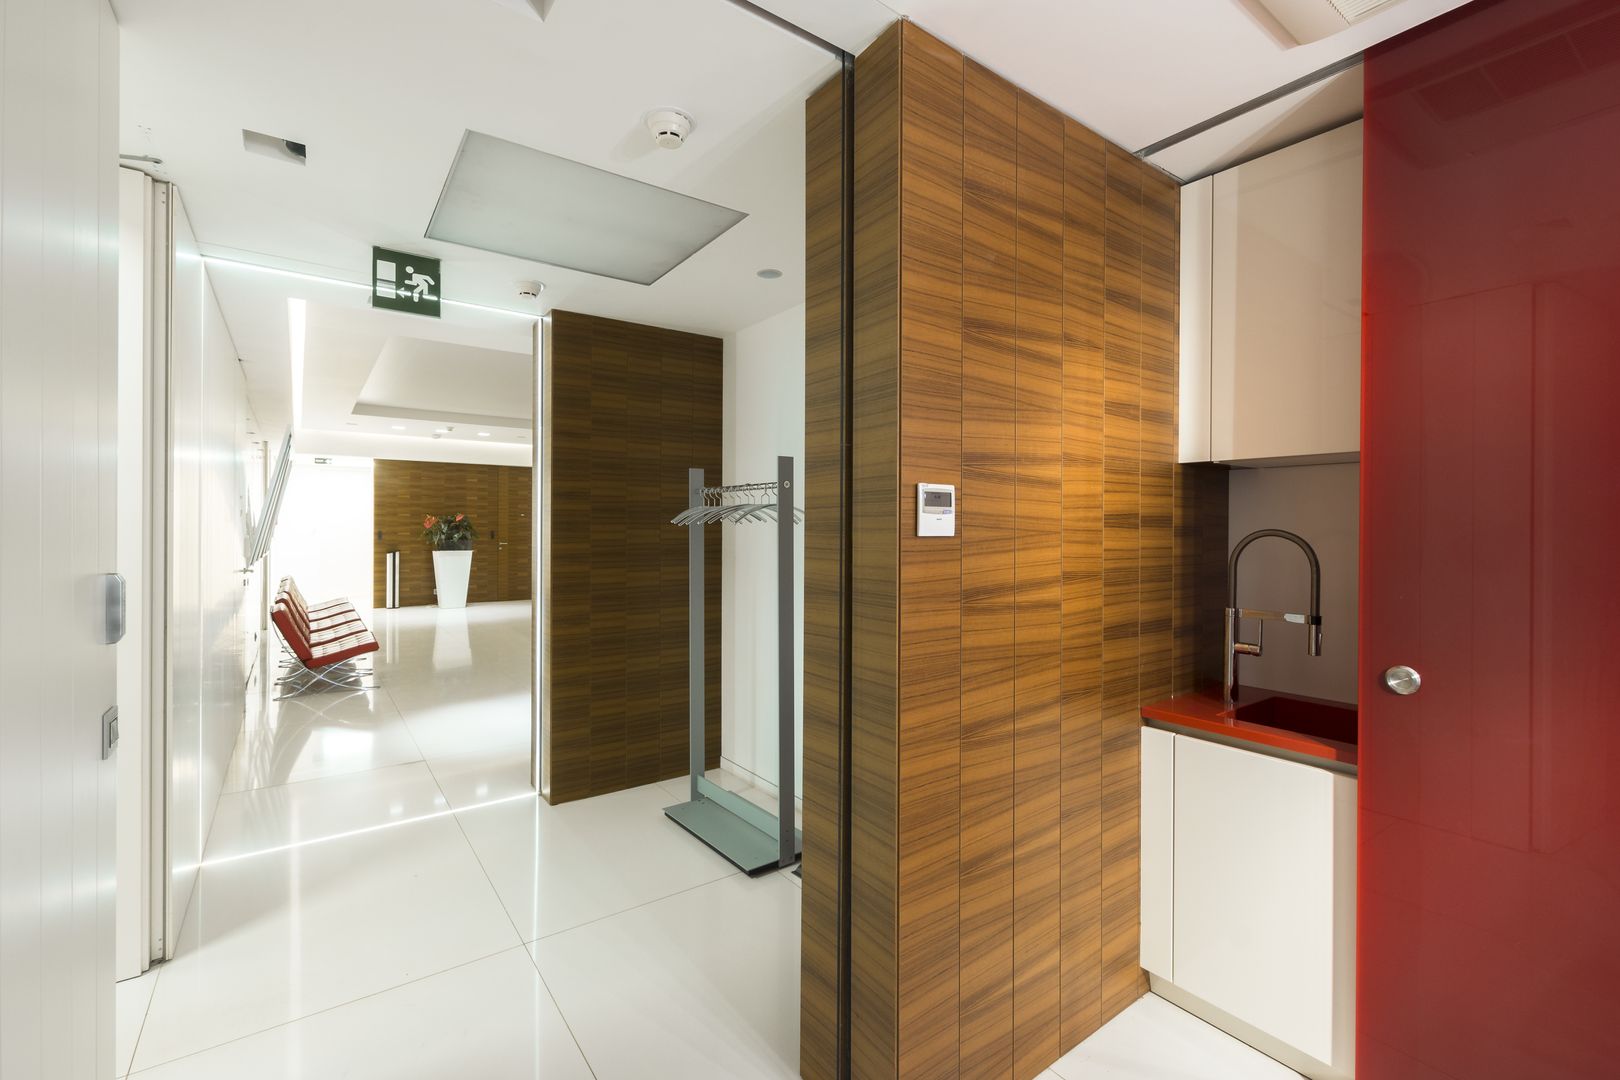 Teak wood wall coverings, sliding glass doors, Moscow office homify Walls لکڑی Wood effect teak wood wall coverings, teak wood boiserie, sliding doors, glass doors, sliding glass doors,Wall & floor coverings